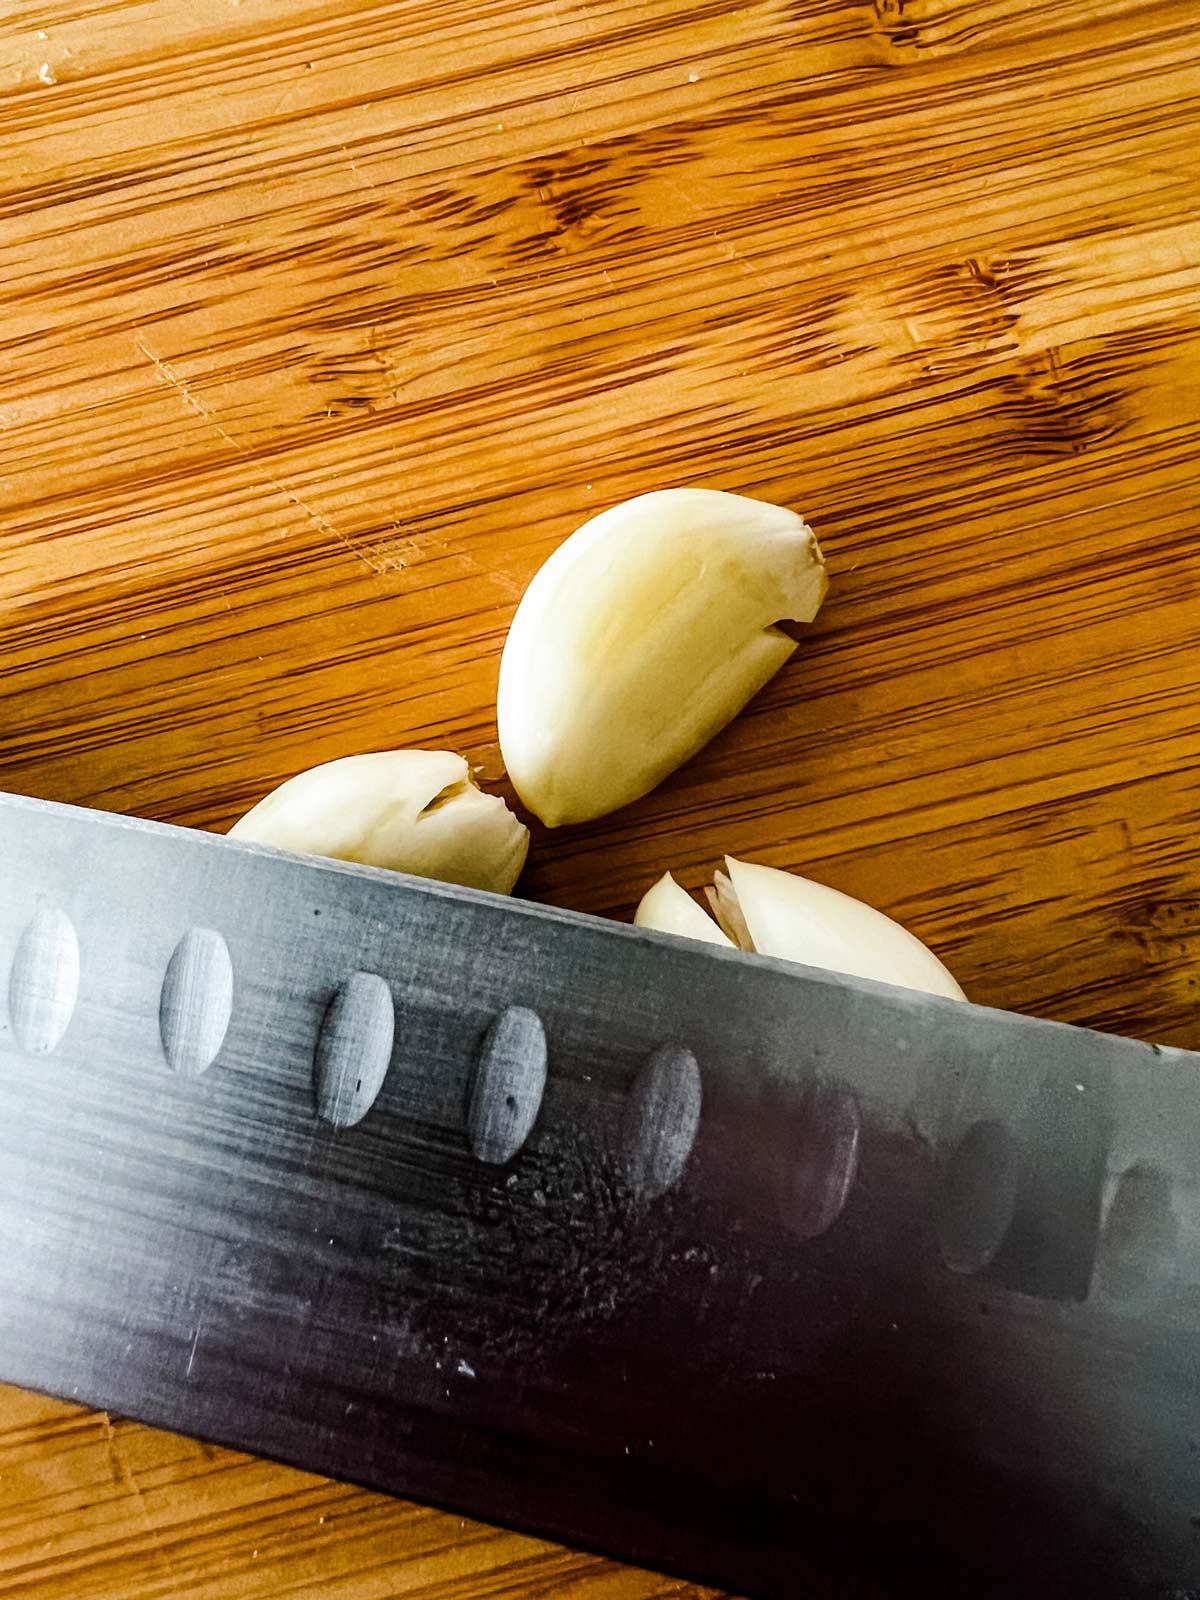 Garlic being crushed with the side of a knife.